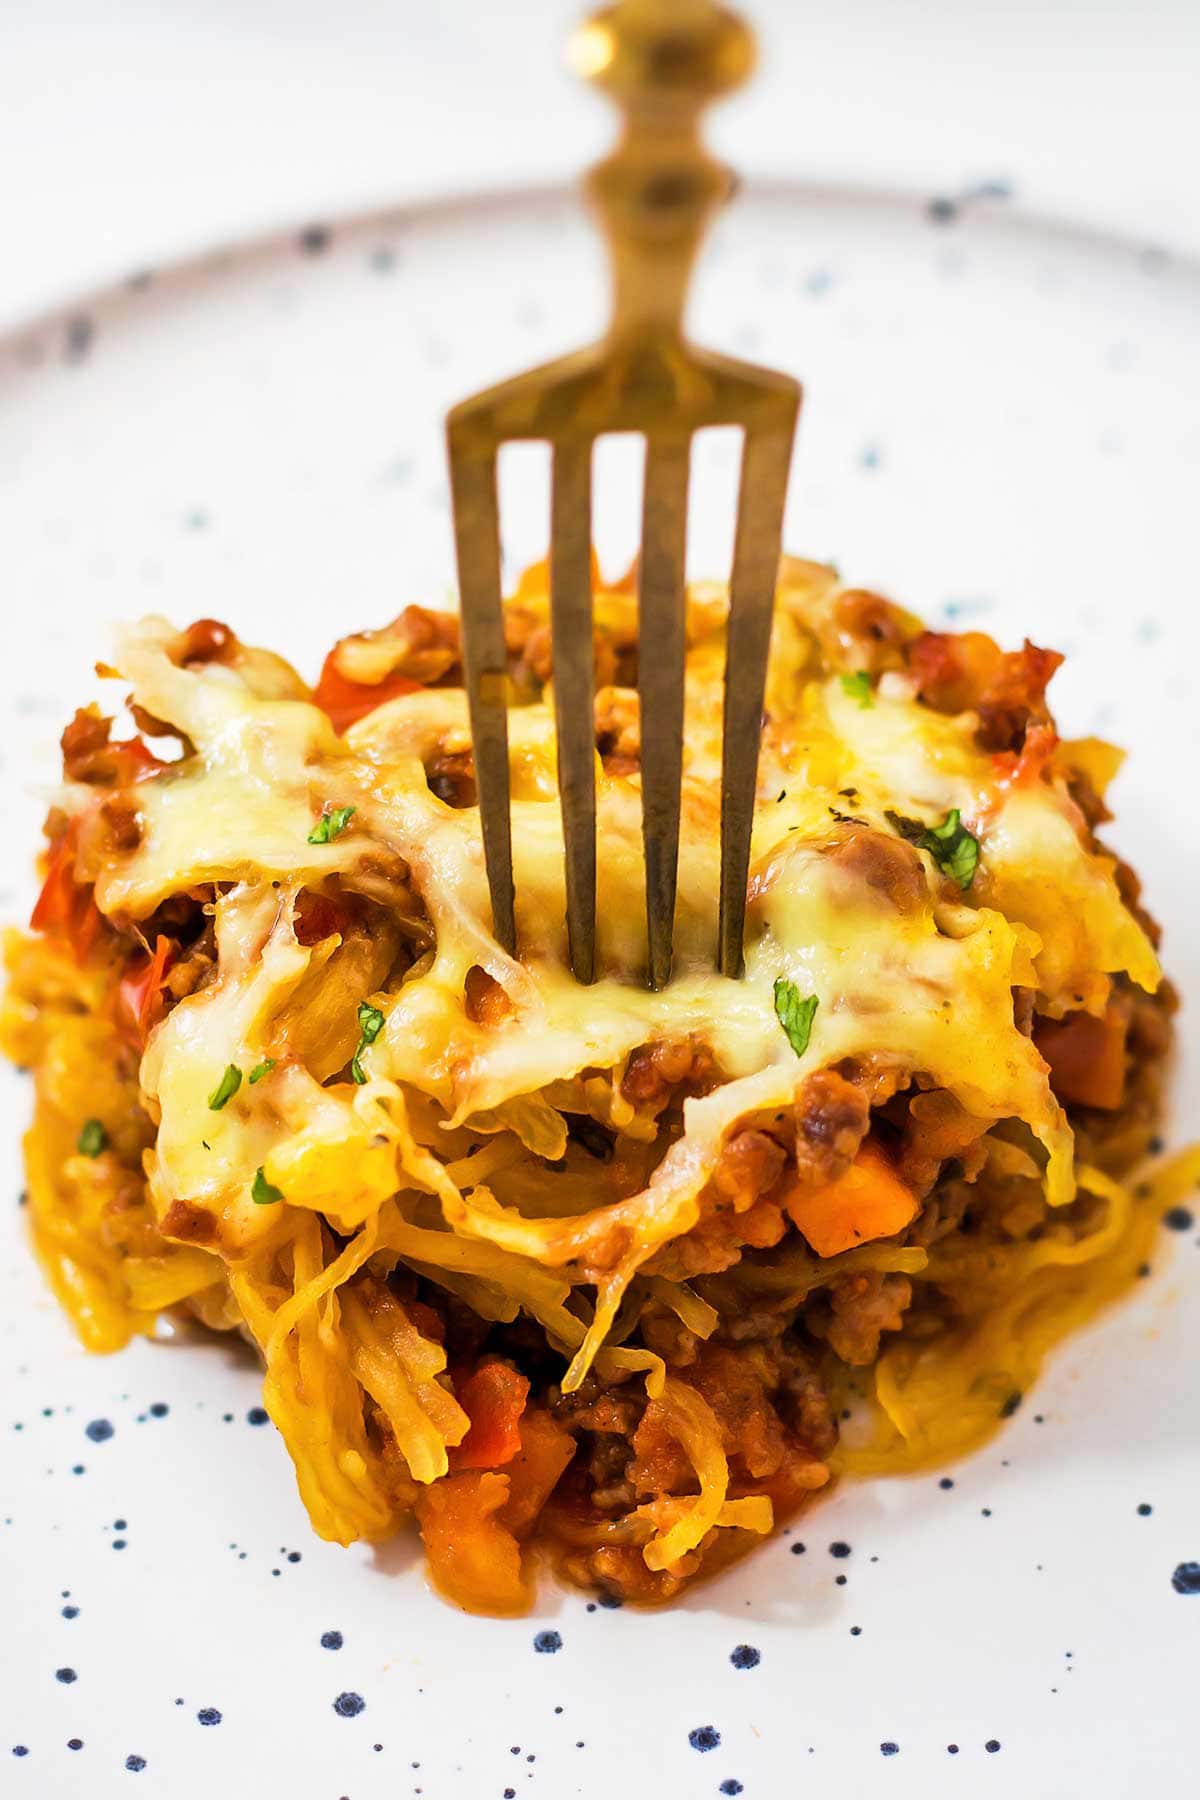 Fork in plated serving of baked spaghetti squash